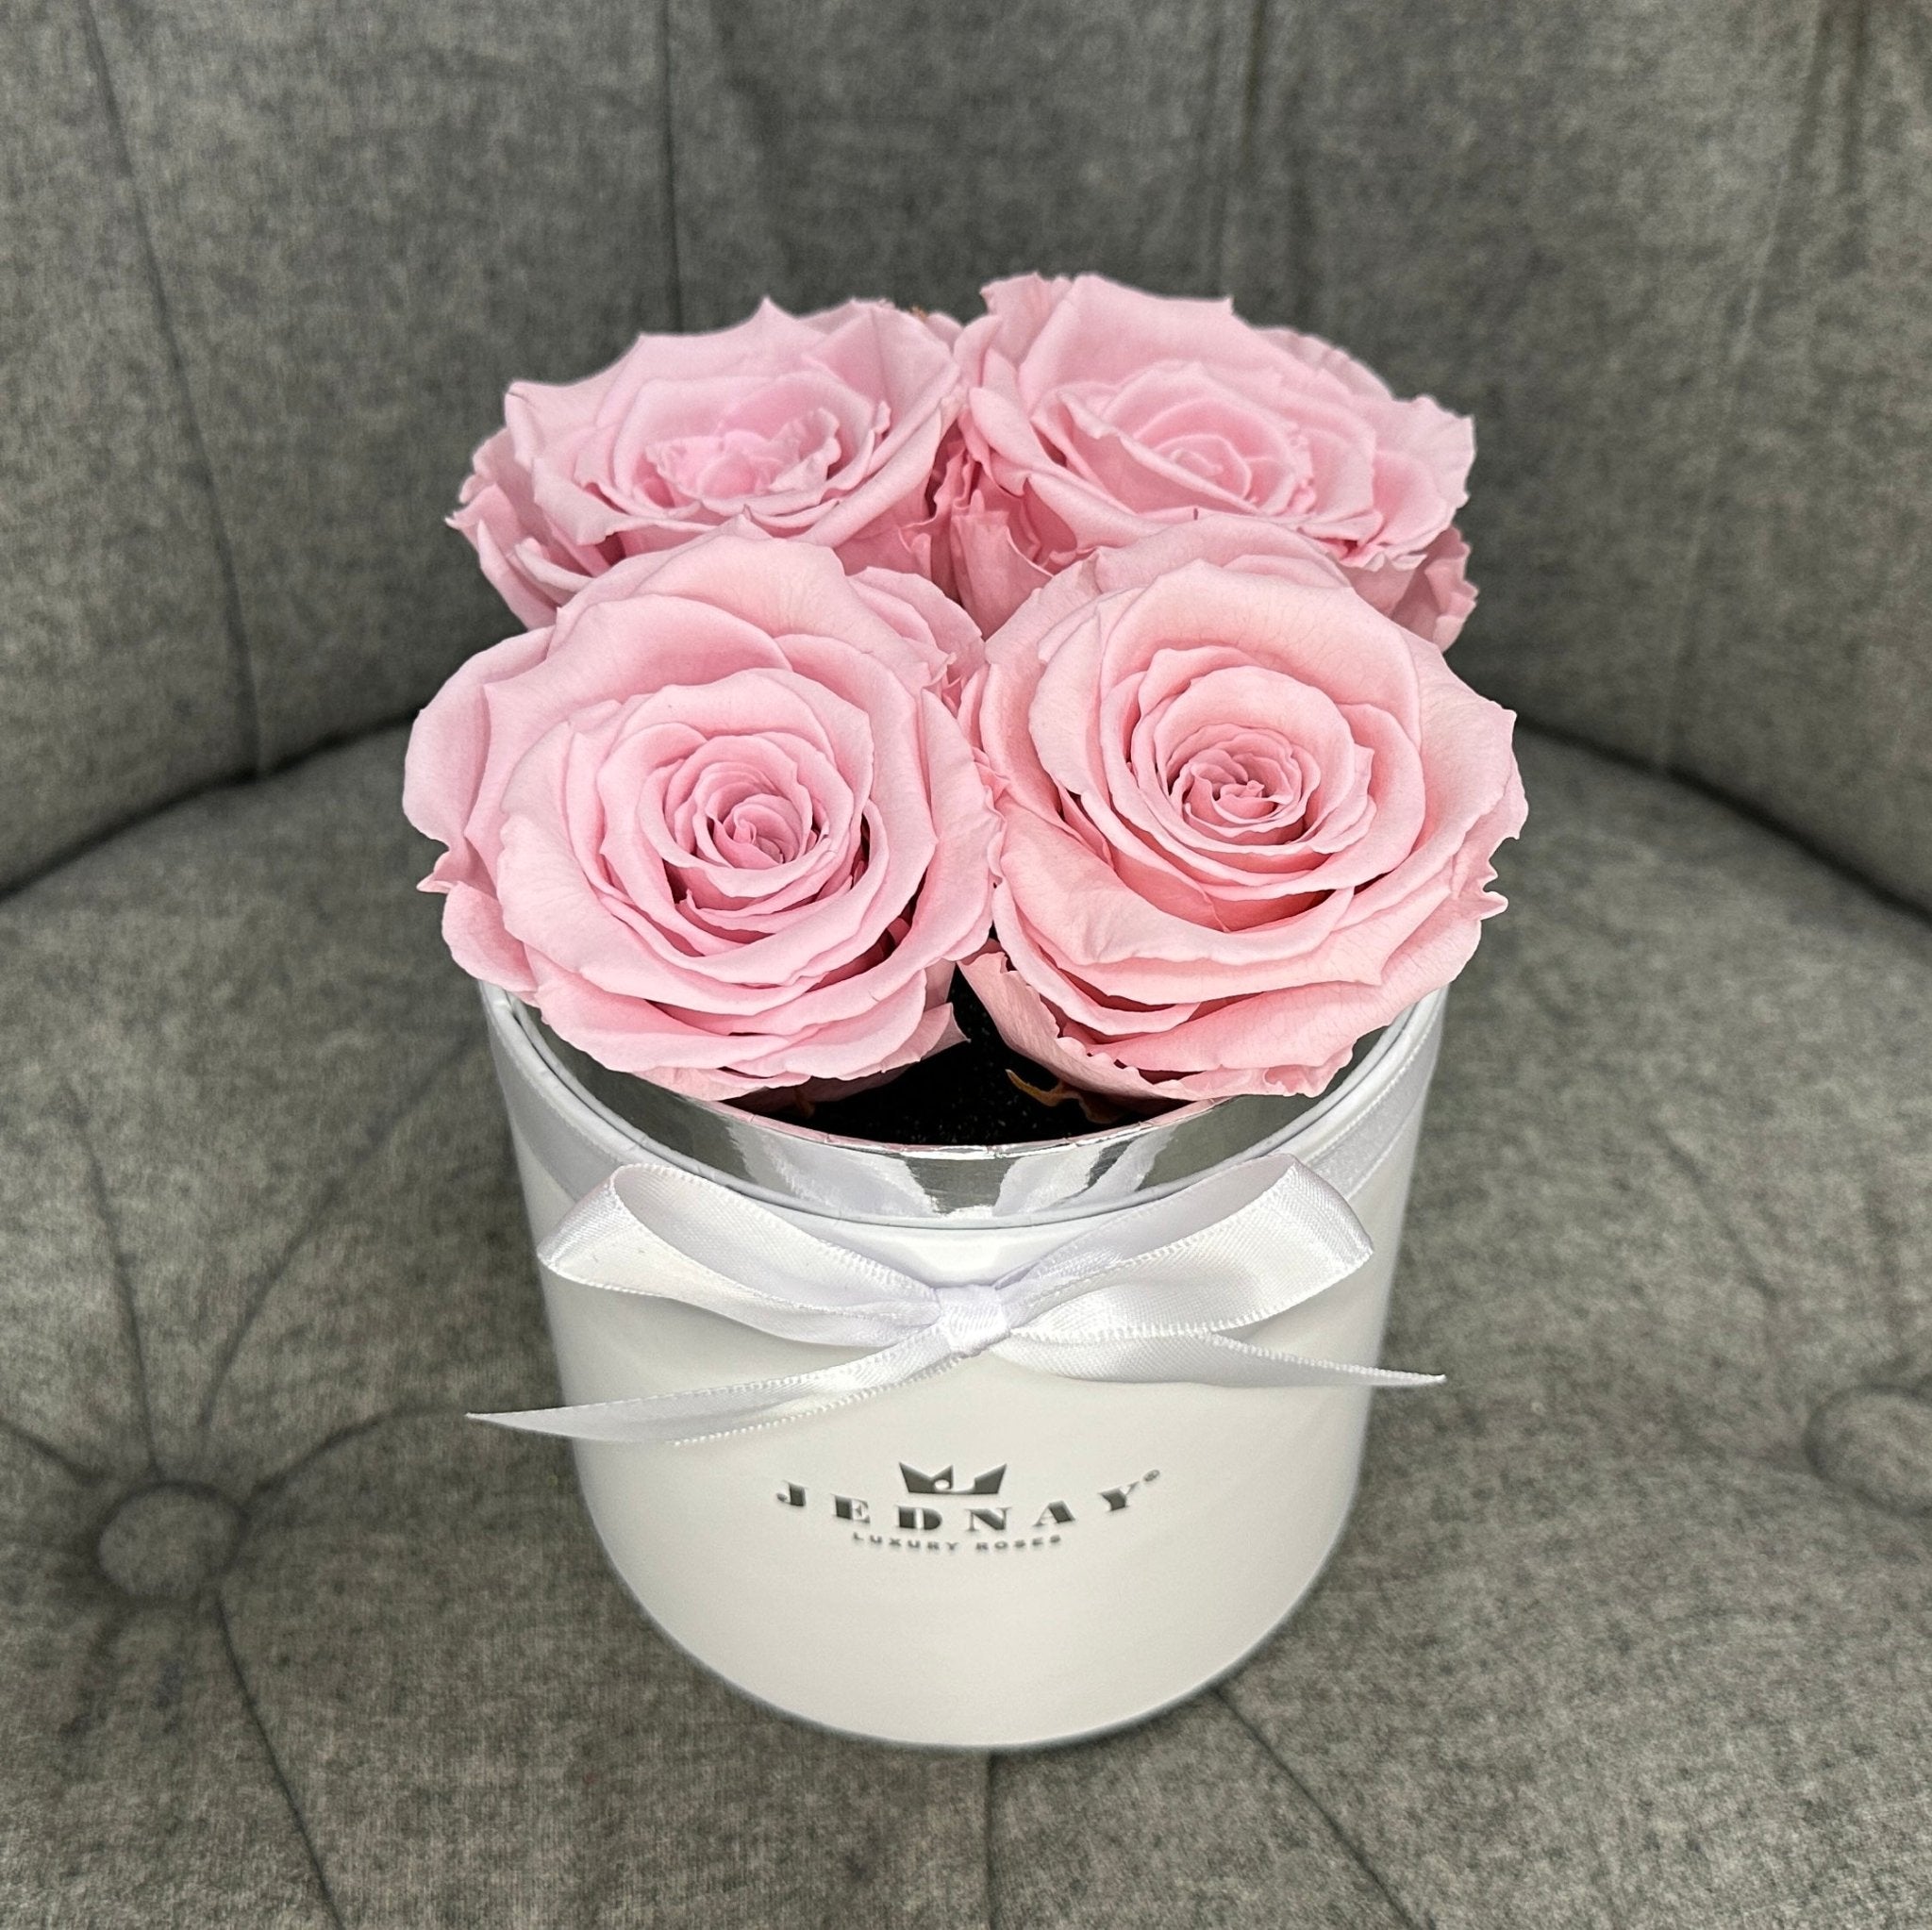 Petite Classic White Forever Rose Box - Soft Pink Eternal Roses - Jednay Roses